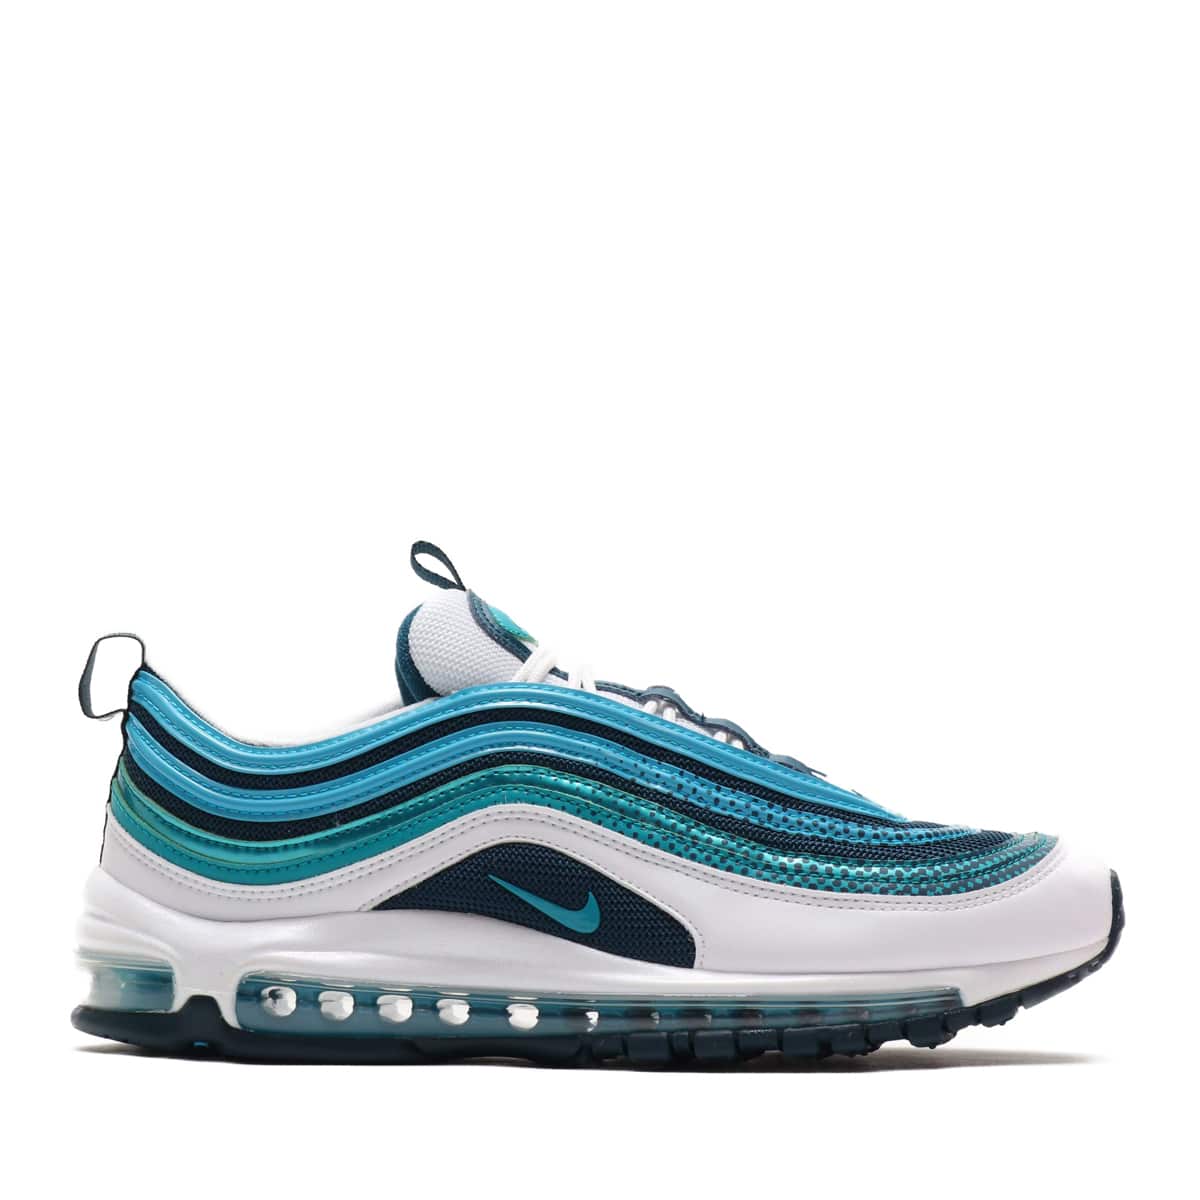 NIKE AIR MAX 97 SE WHITE/SPRT TEAL-NGHTSHD-BL FRY 19SU-S